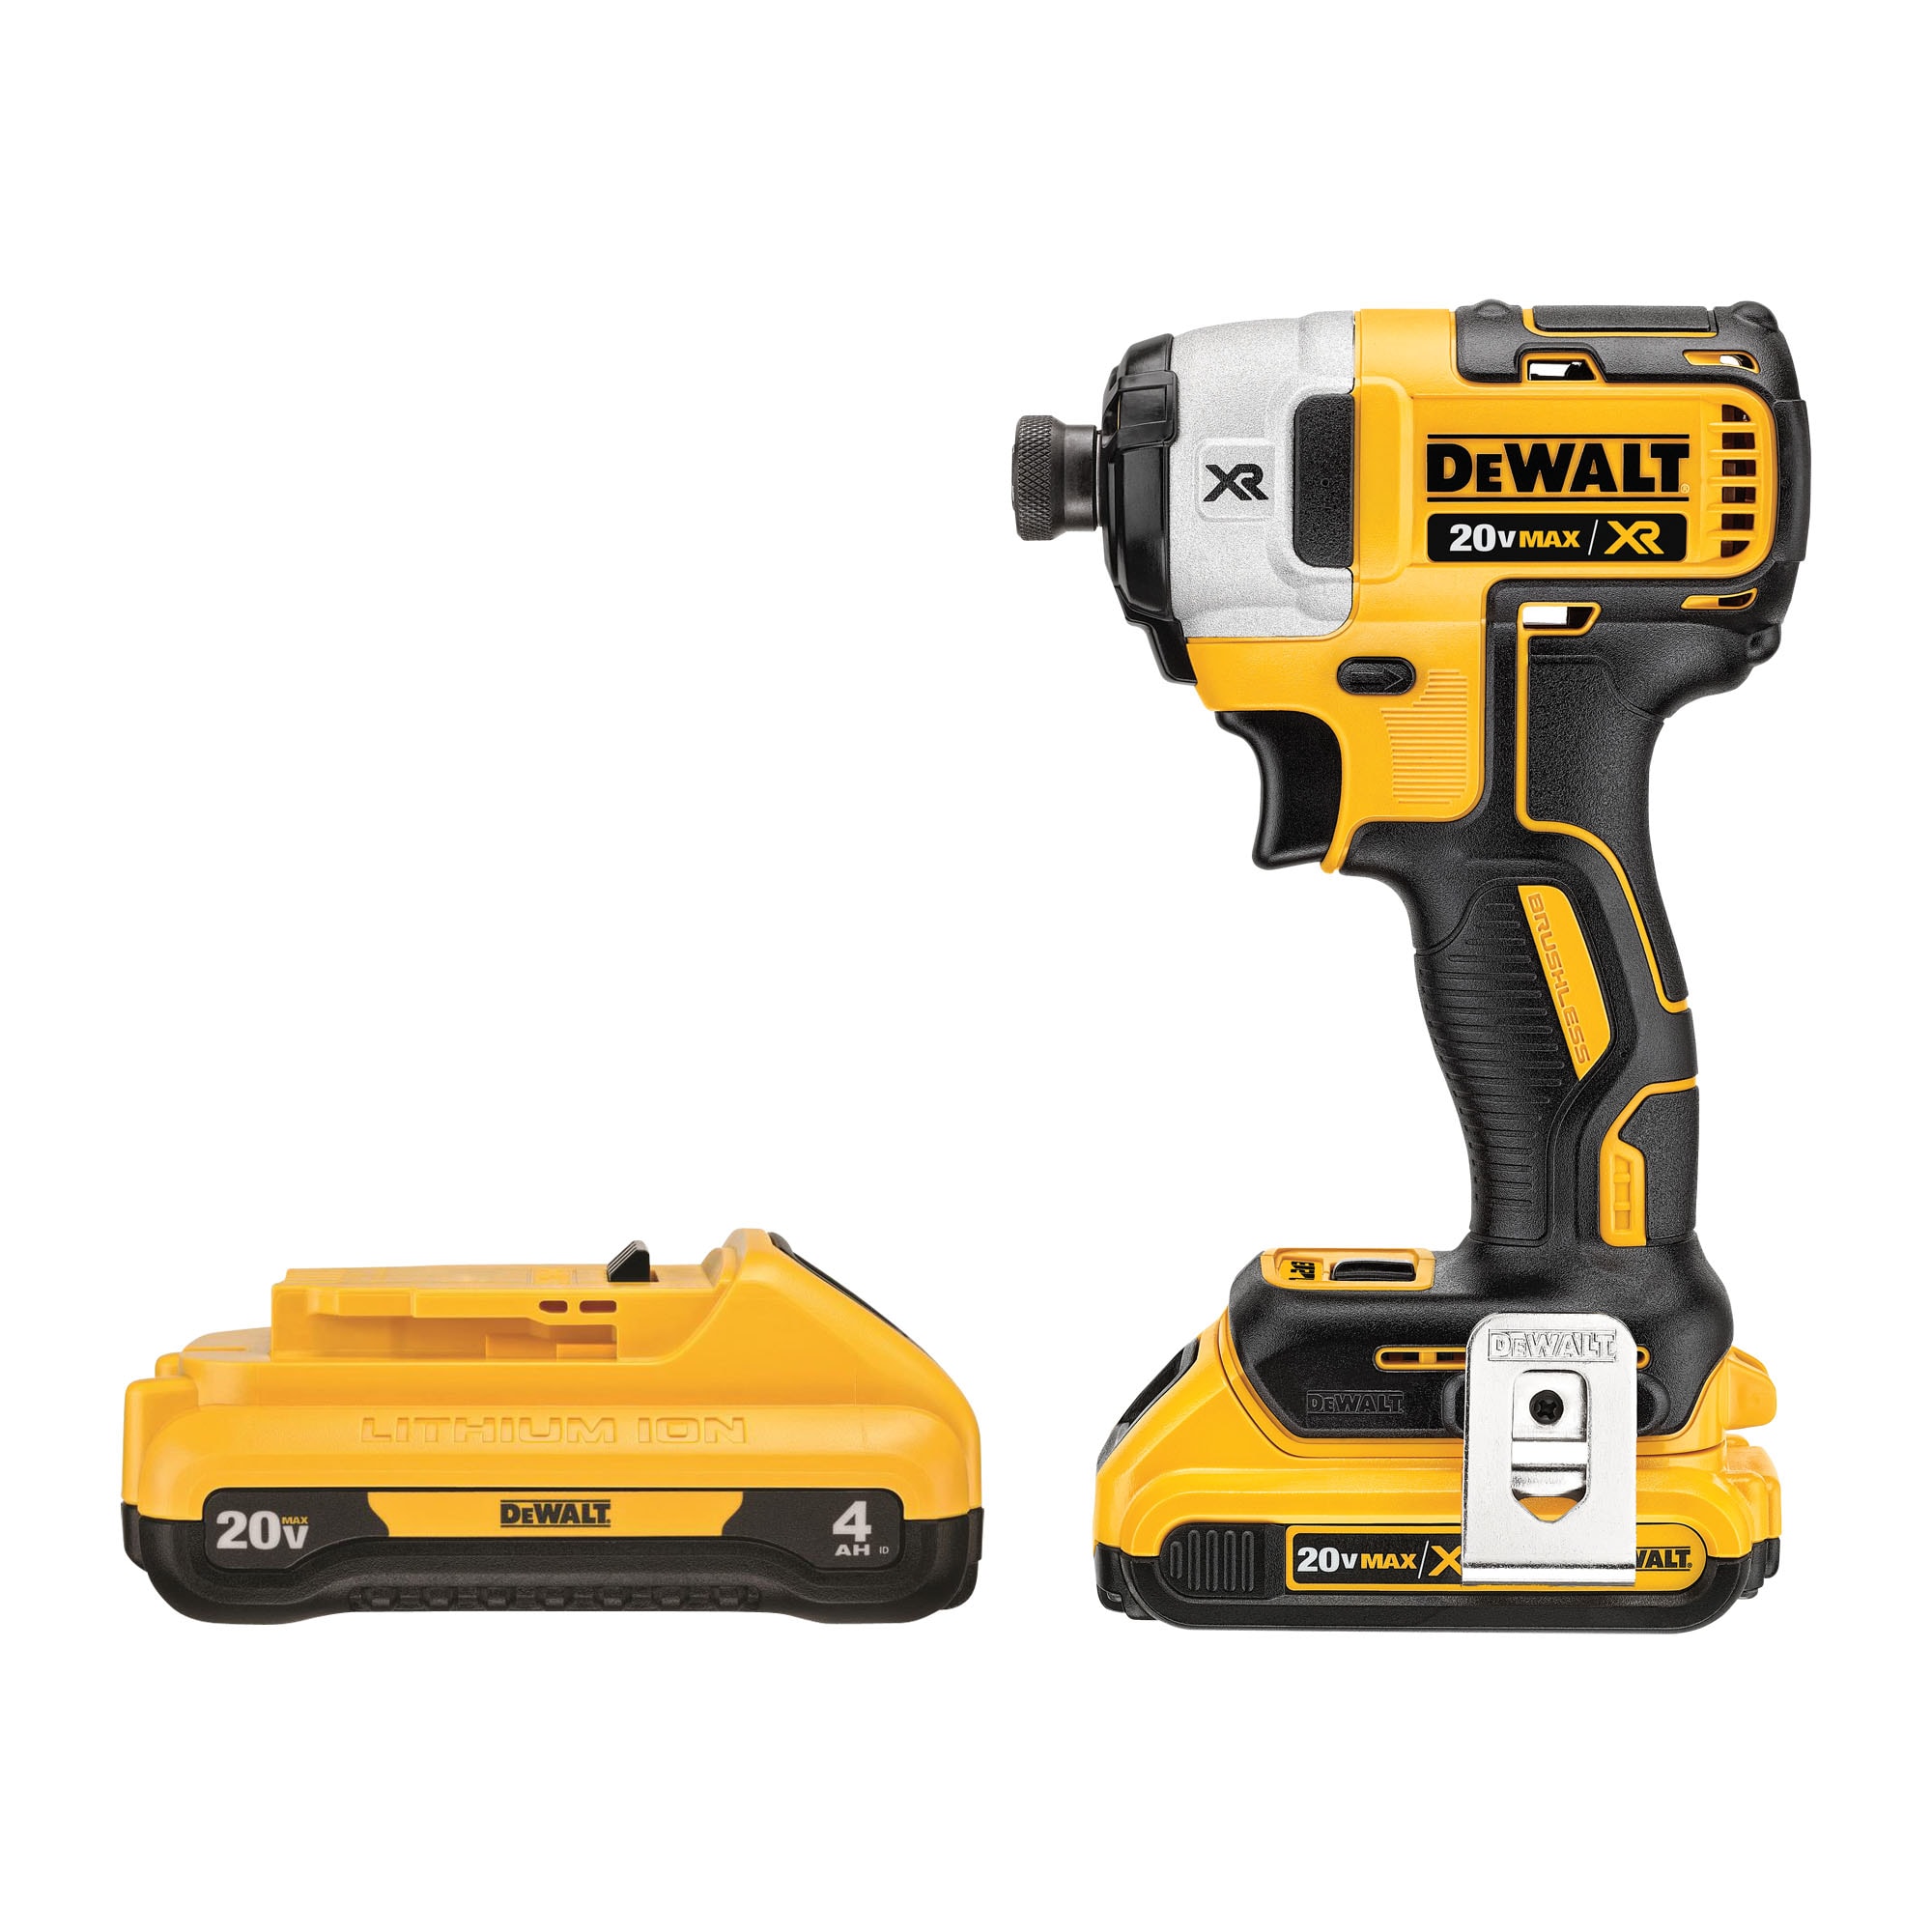 DEWALT XR 20-volt Max Variable Speed Brushless Cordless Impact Driver (2-Batteries Included) & 20-Volt Max 4 Amp-Hour Lithium Power Tool Battery